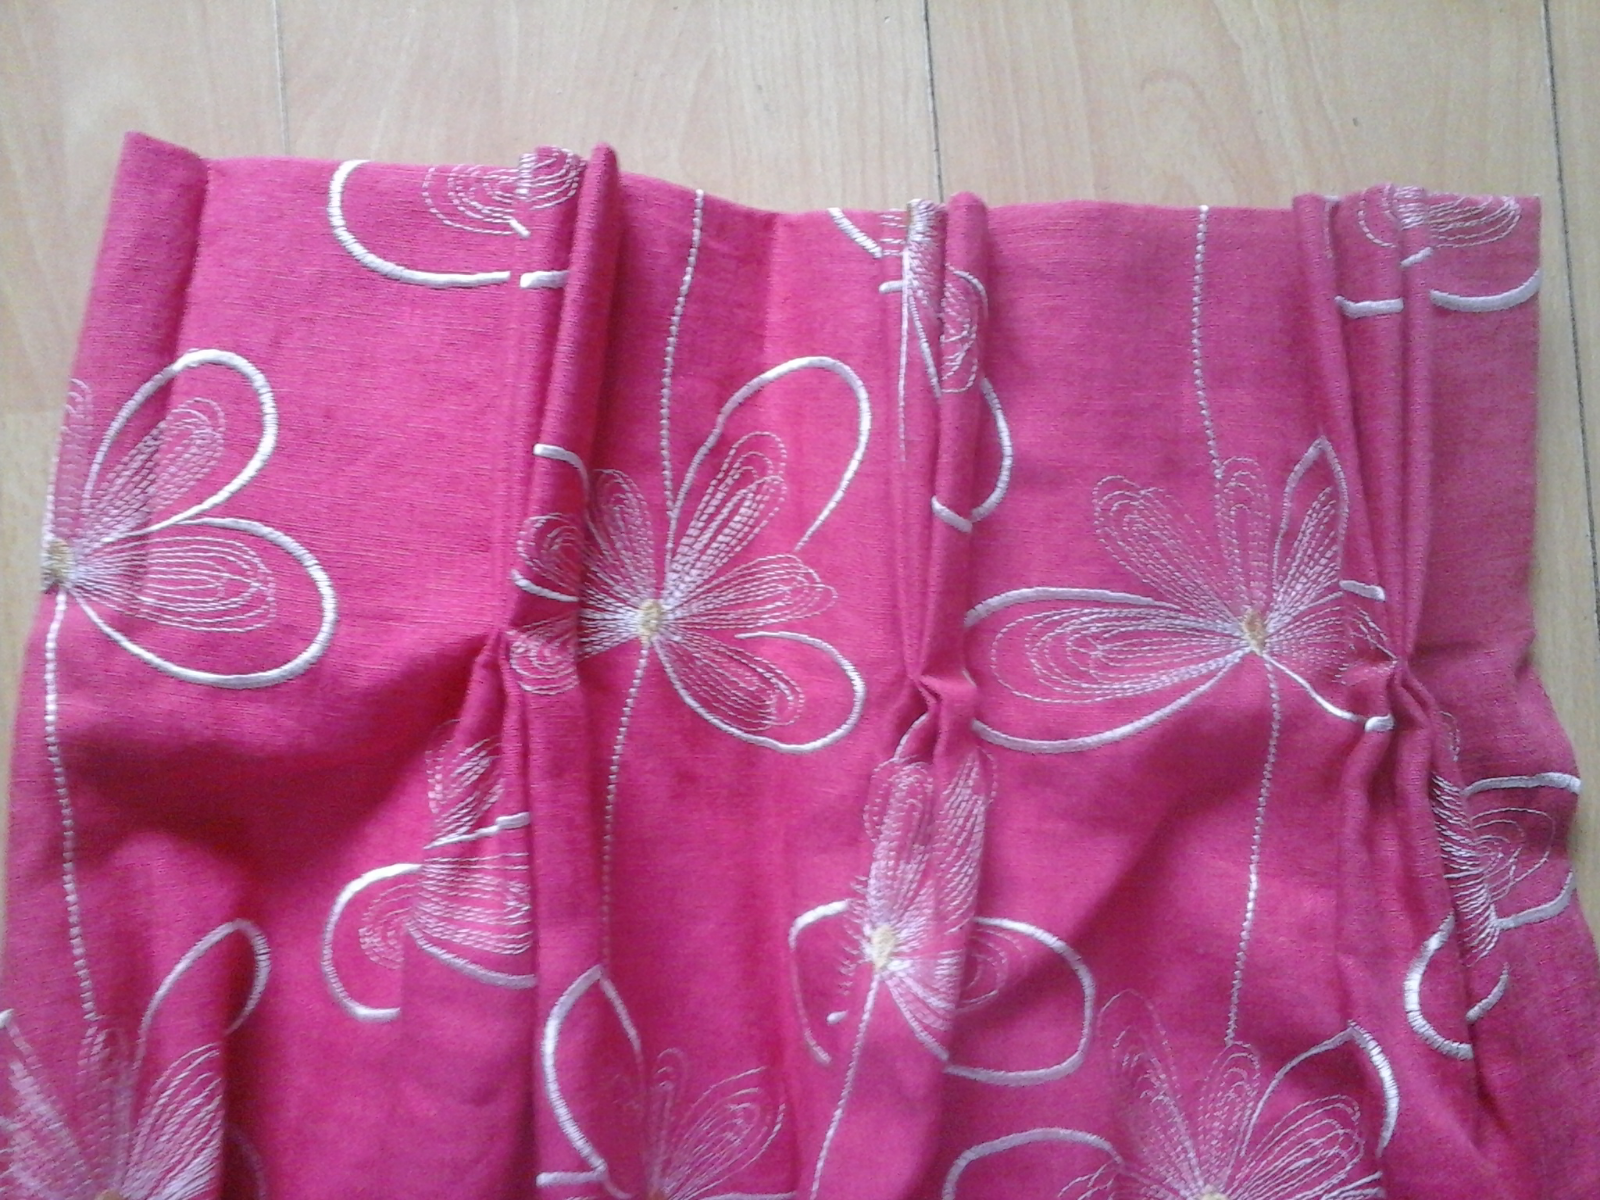 Homebase Pink Floral Pair Of Curtains With Ties 72 - Stitch - HD Wallpaper 